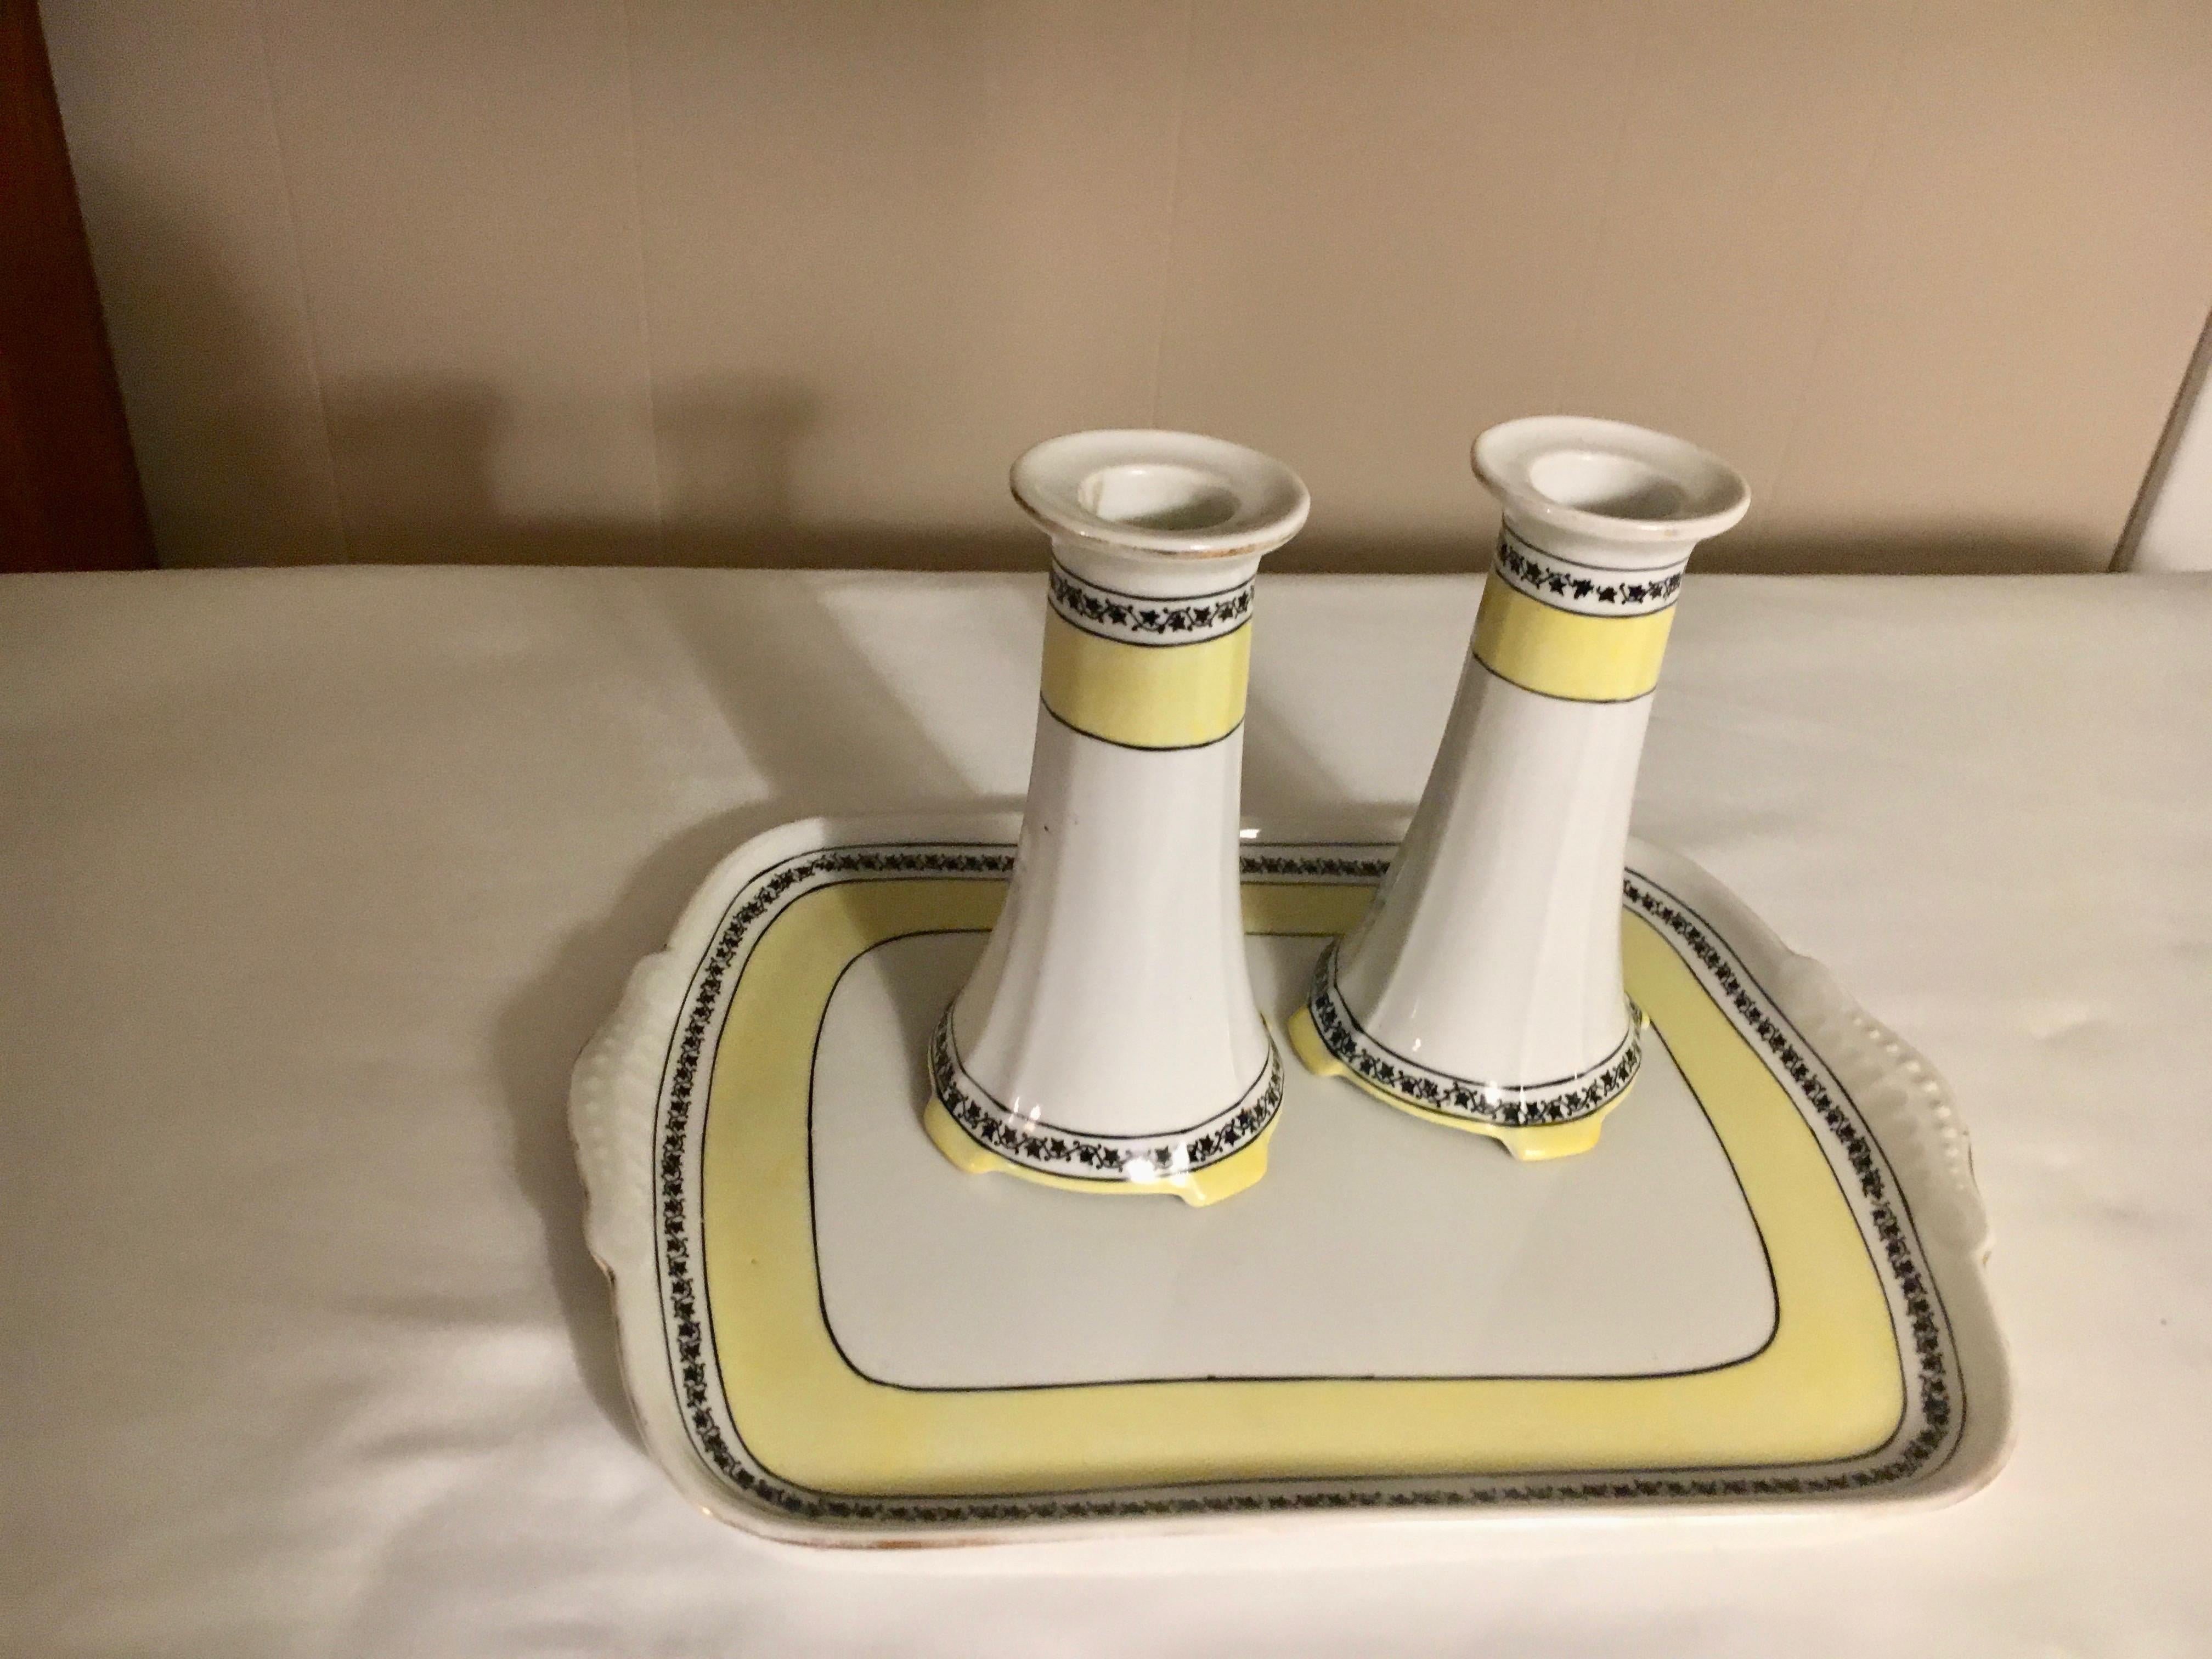 Union Bavaria Porcelain Tray and Candlesticks For Sale 2